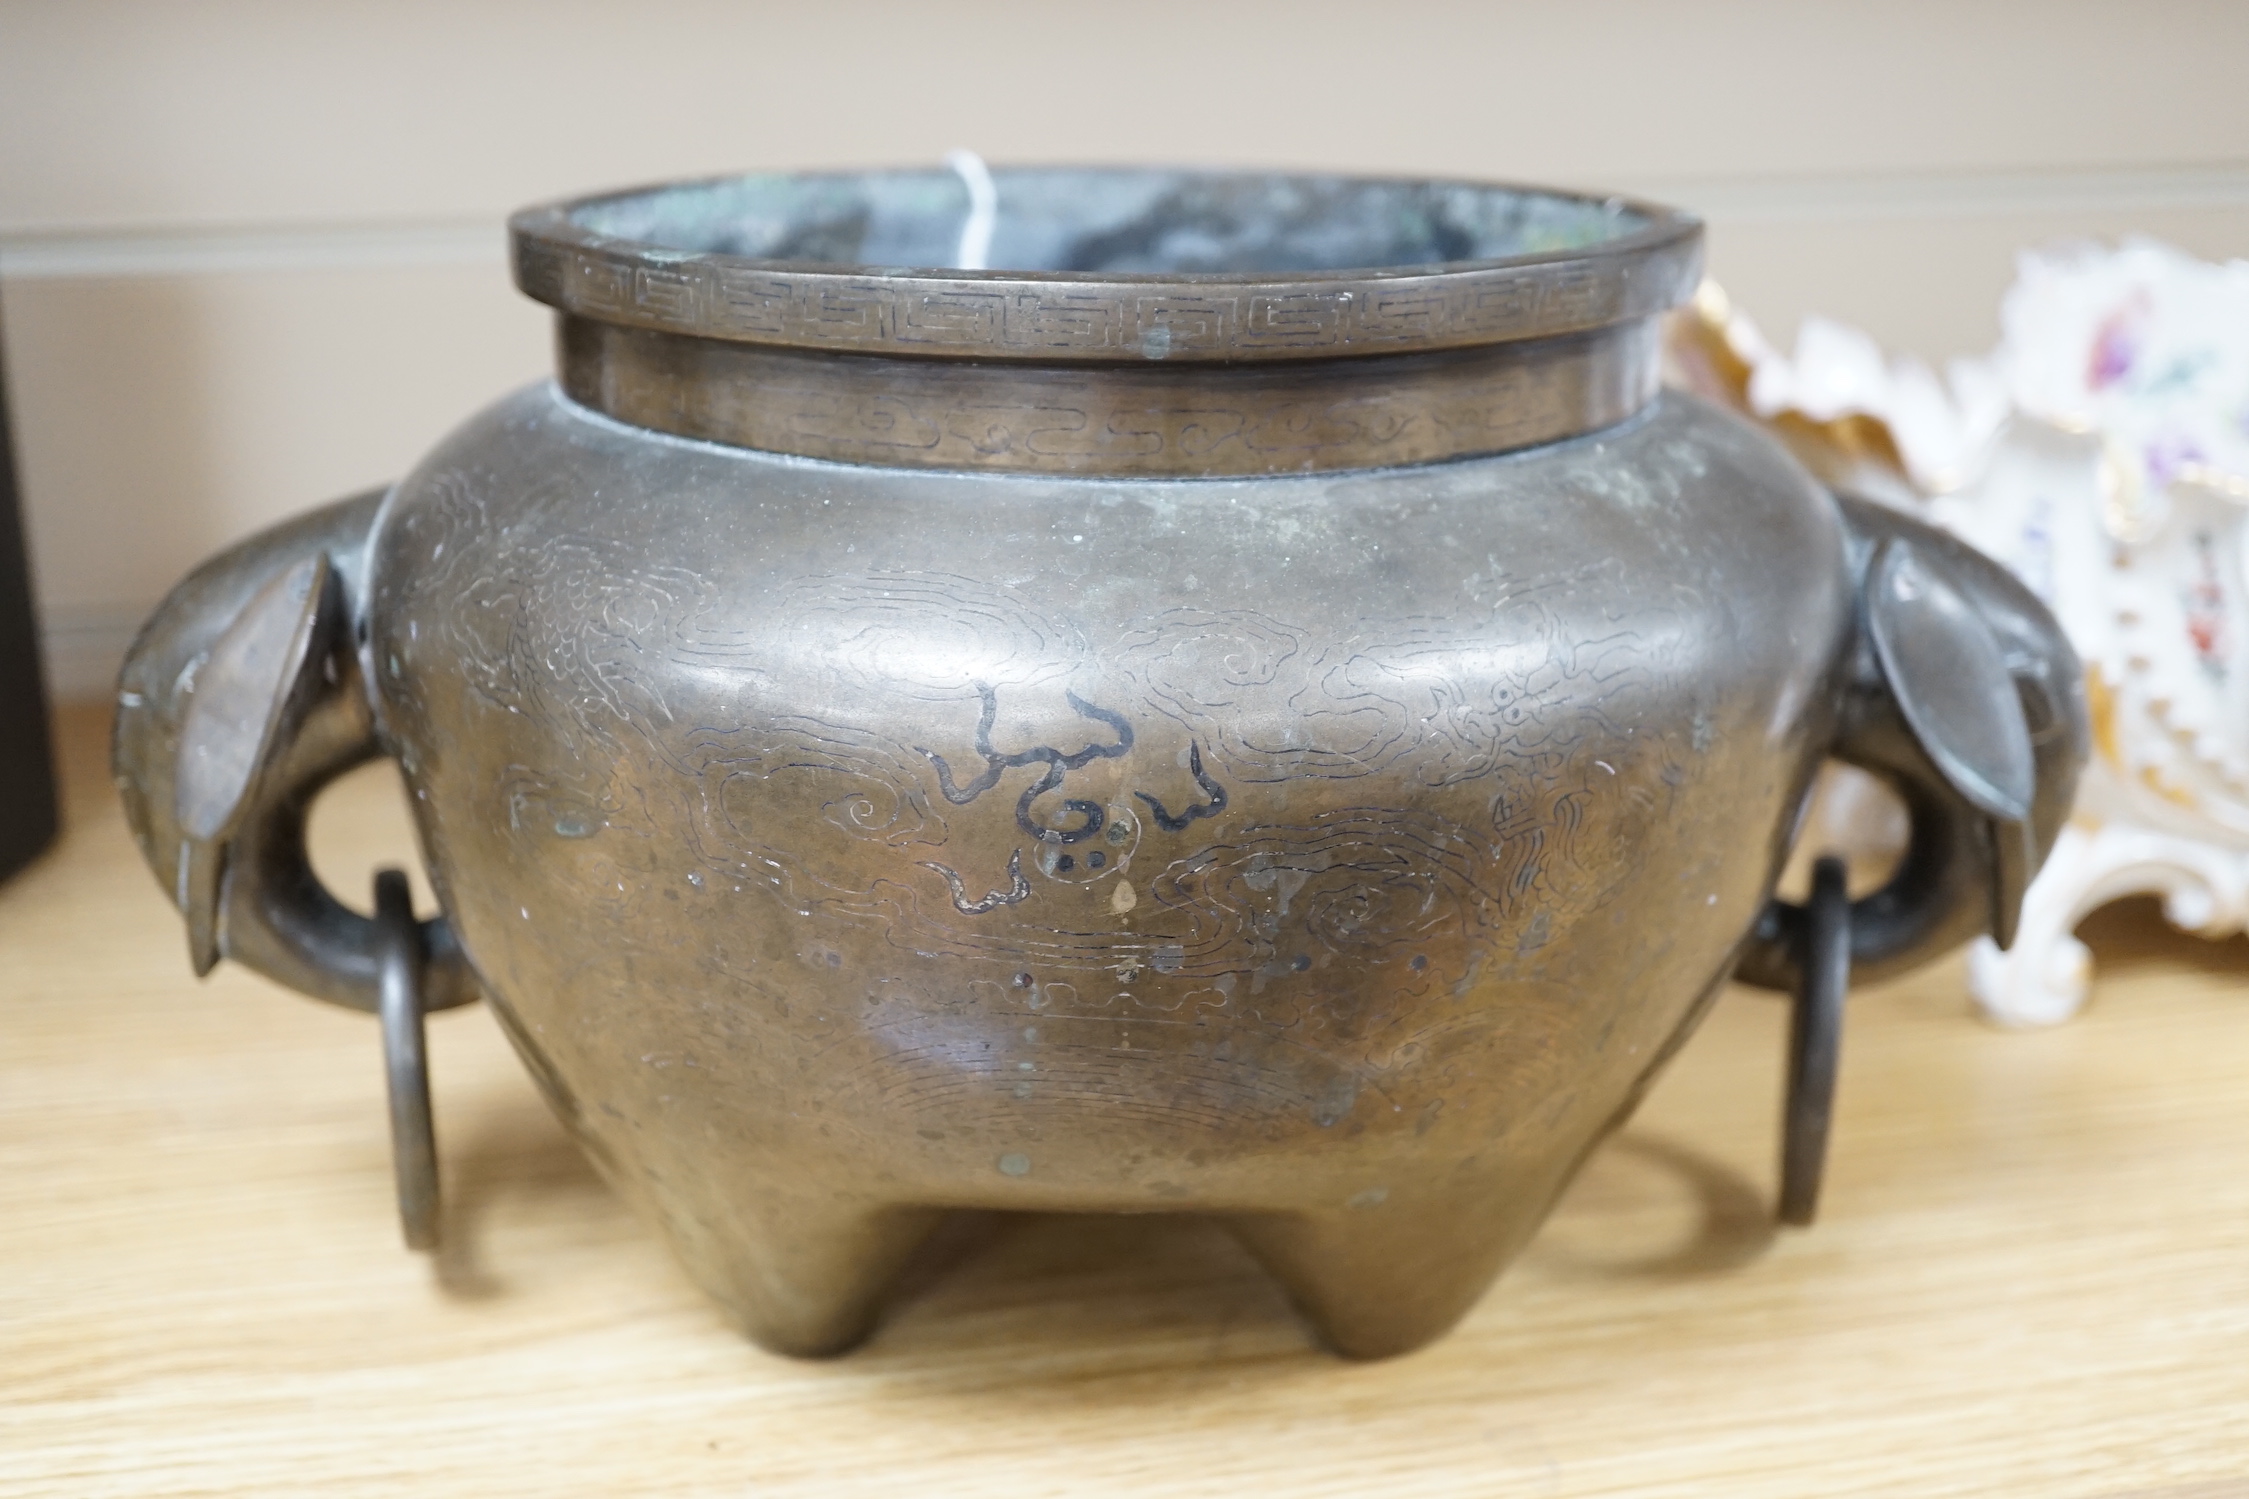 A large Chinese silver inlaid bronze elephant handled censer, signed Sishou, 19th century, 16cms high, 29cm wide